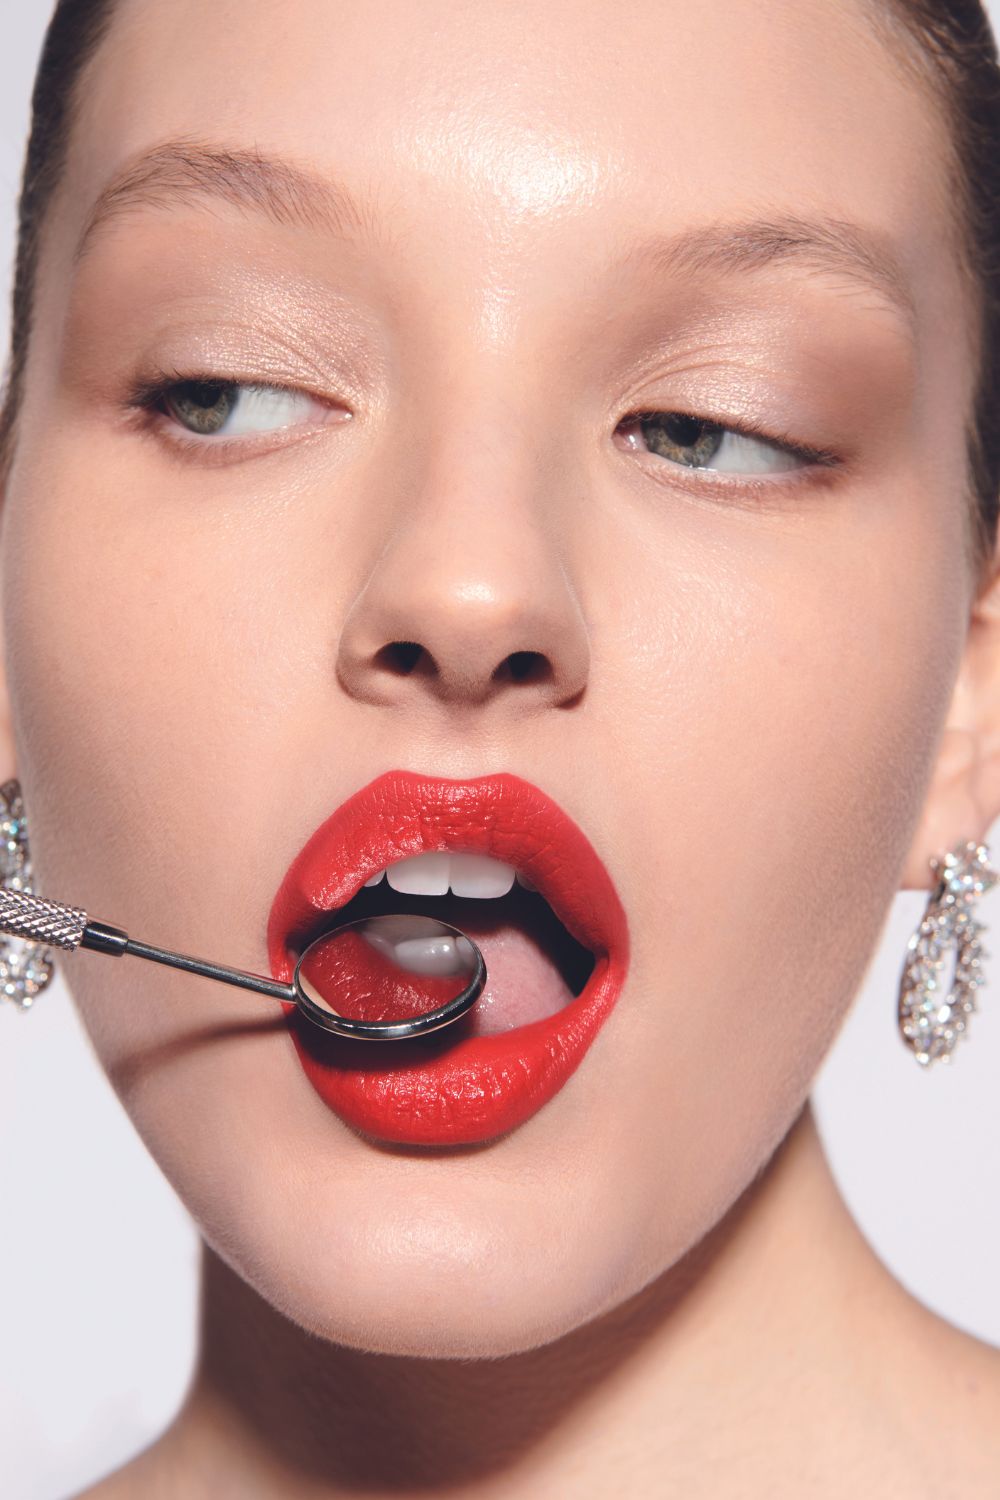 The 10 Best Aesthetic Treatments To Try Now, According To Experts